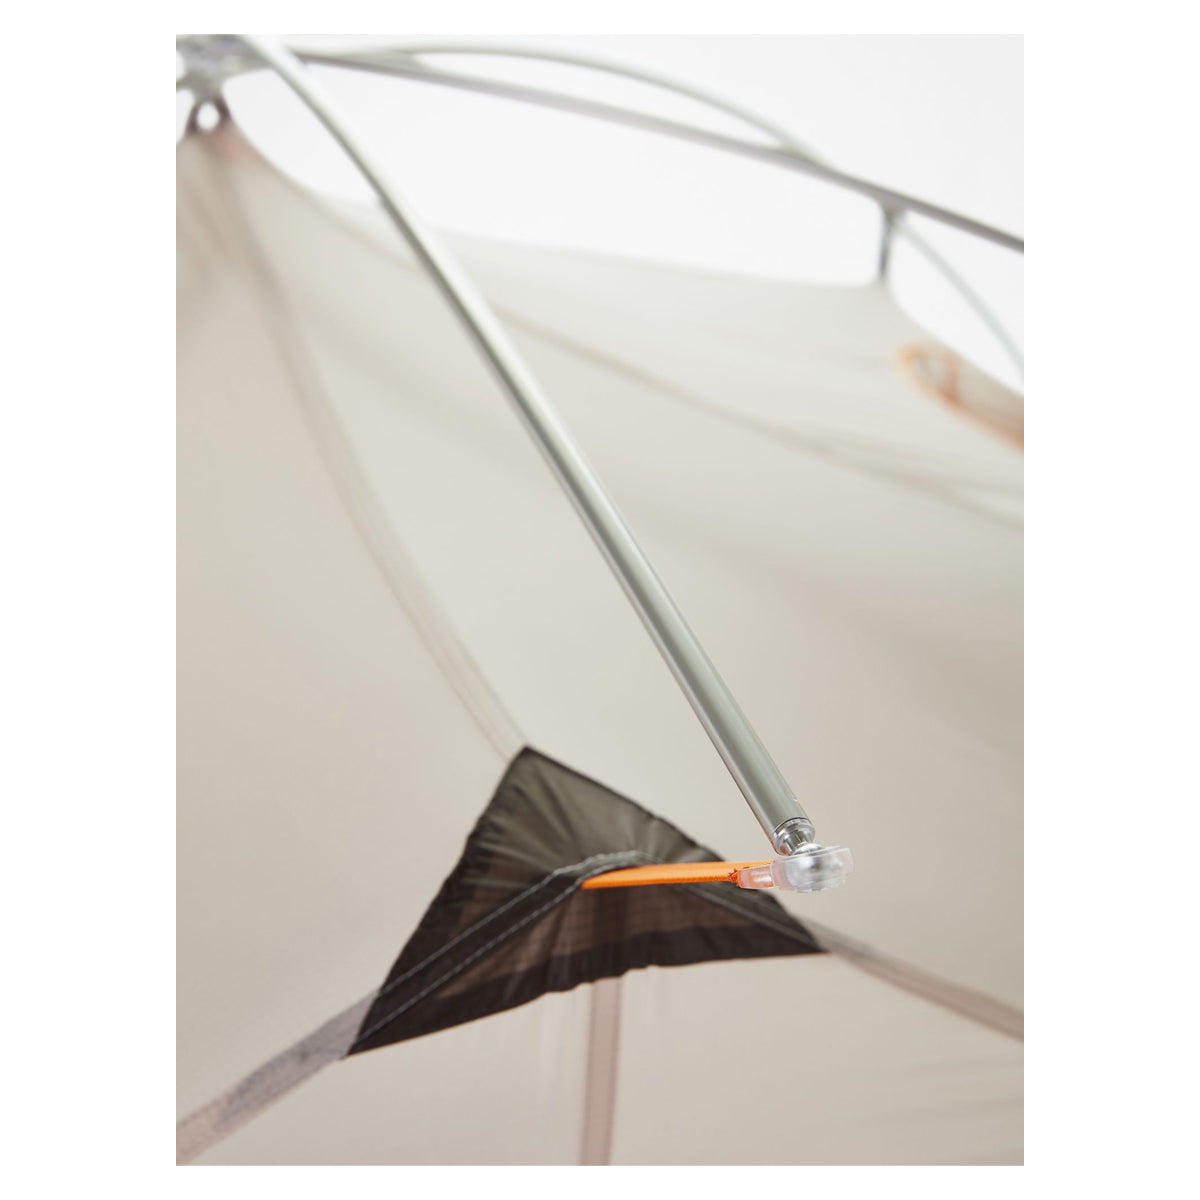 Marmot Fortress UL 2 Person Tent